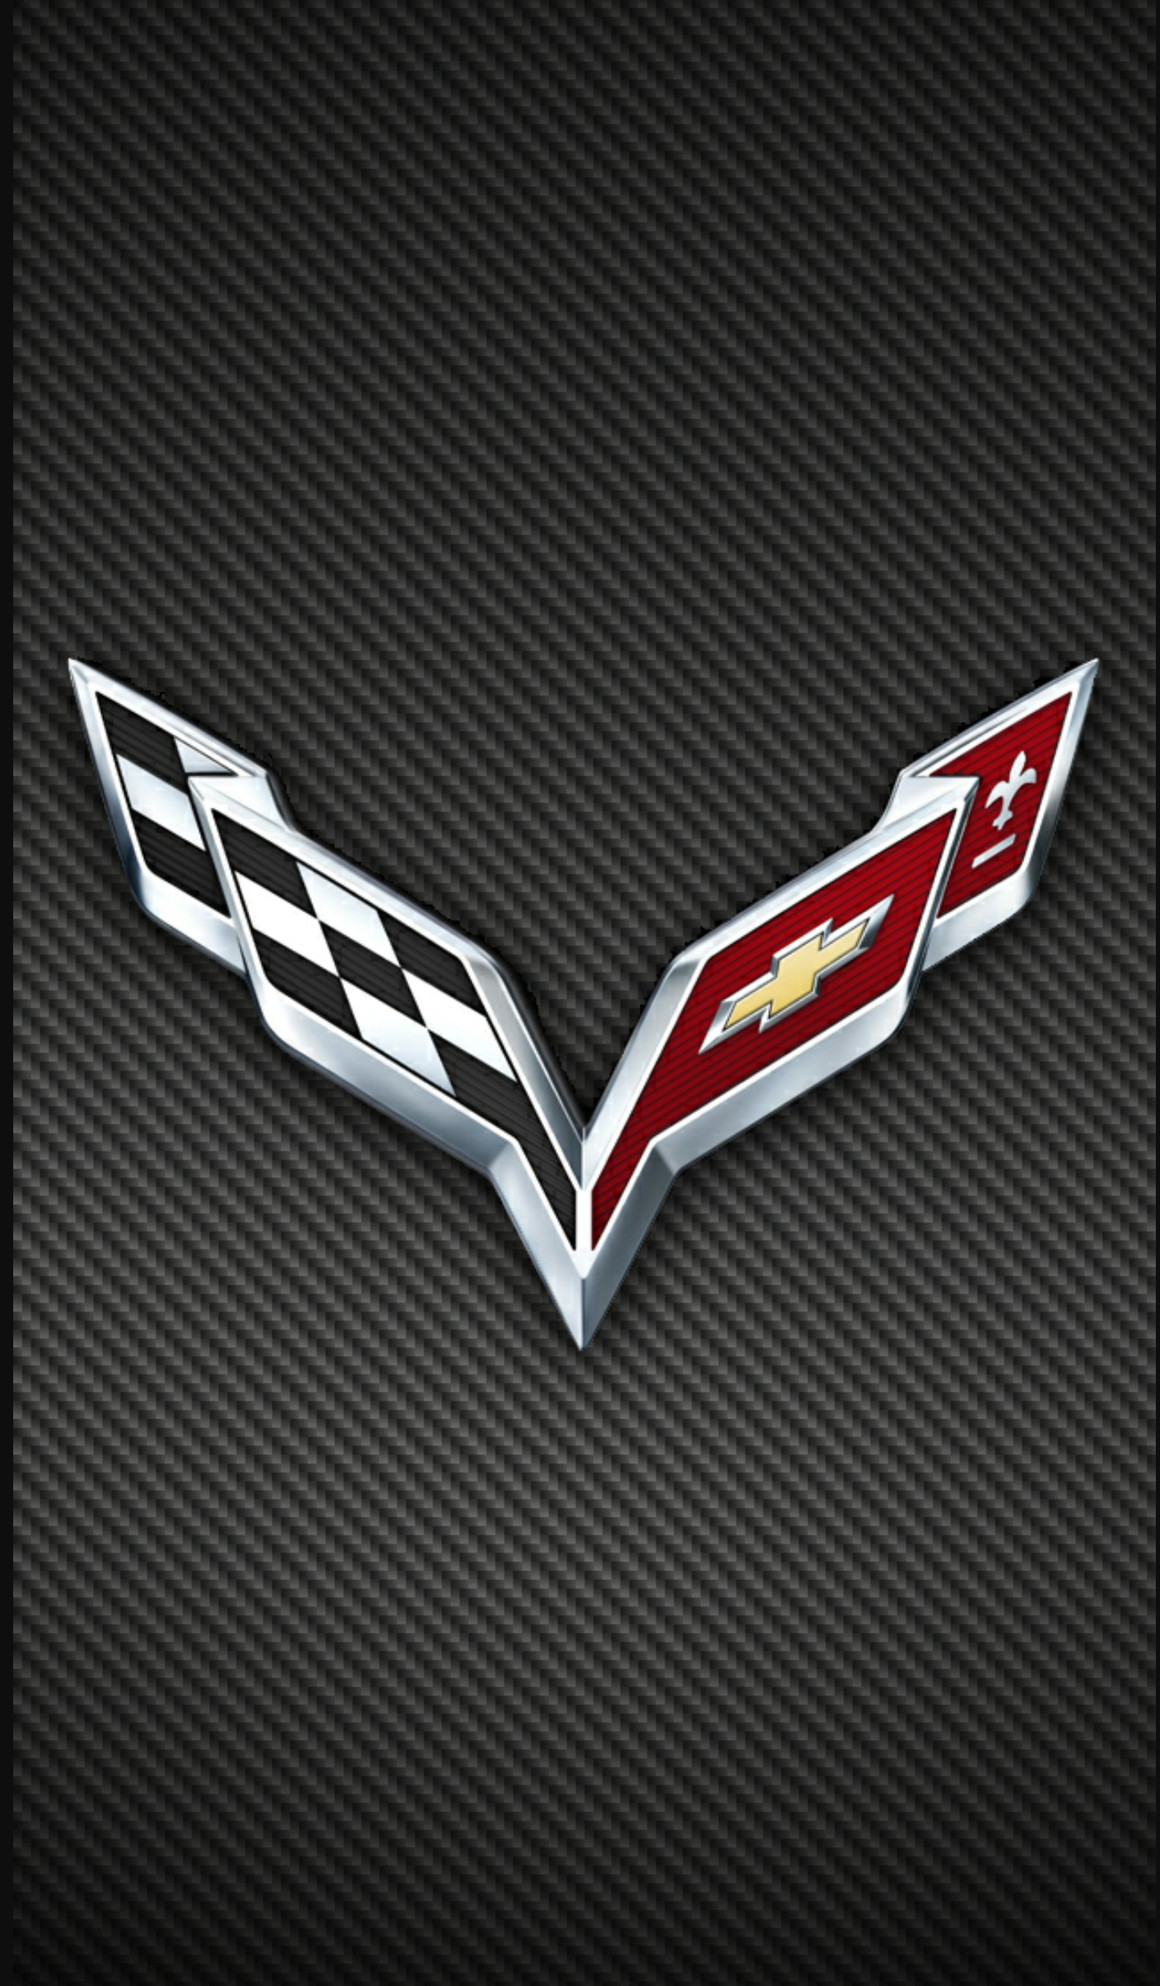 1160x1986 I also see many more good wallpapers that are Corvette oriented so let's  share your favorites.